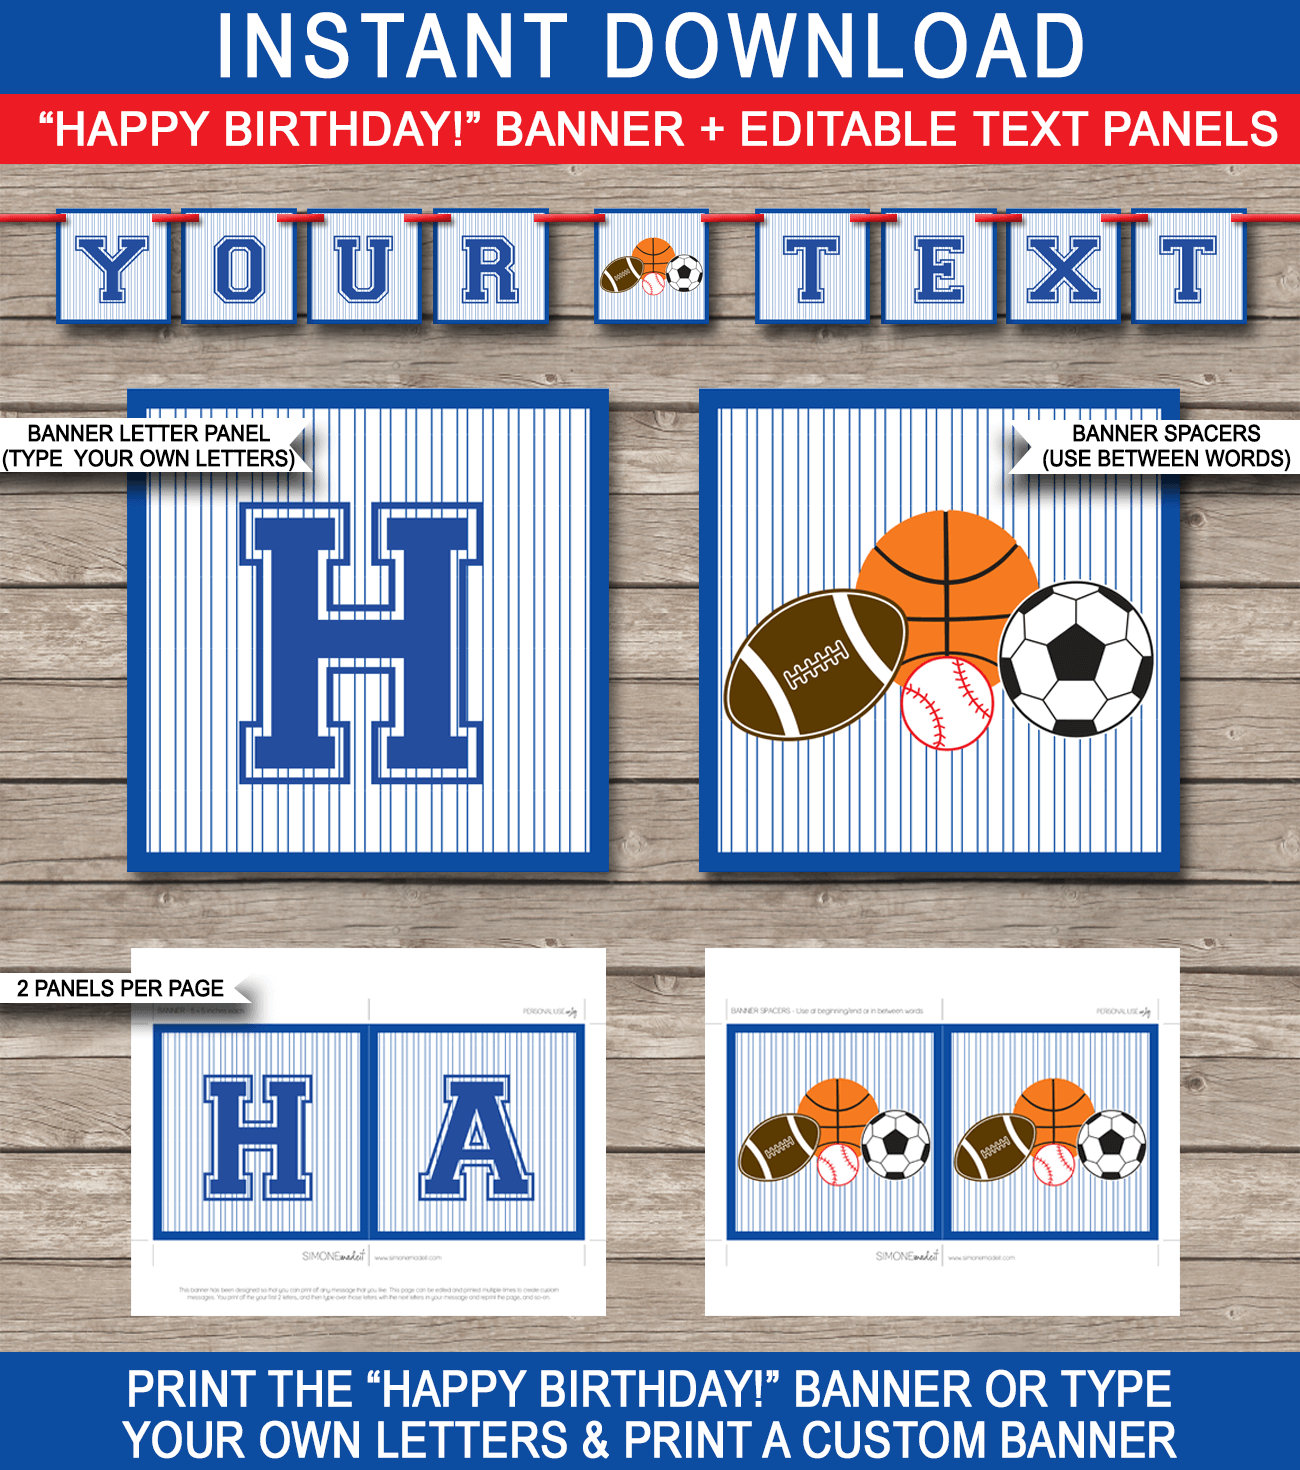 All Star Sports Party Banner Template - Sports Bunting - Happy Birthday Banner - Birthday Party - Editable and Printable DIY Template - INSTANT DOWNLOAD $4.50 via simonemadeit.com